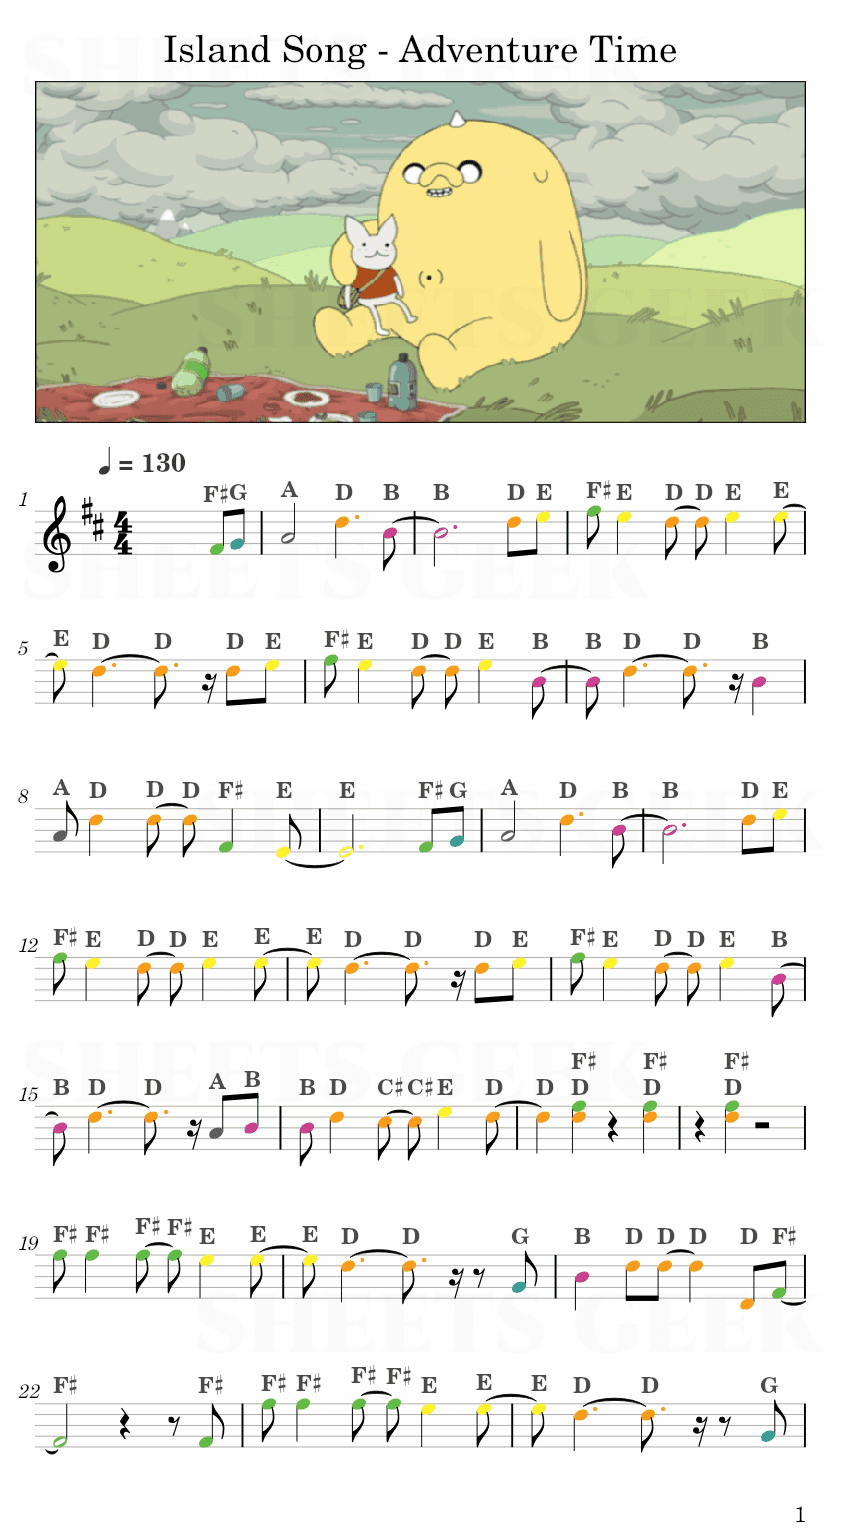 Island Song (Come Along With Me) - Adventure Time Easy Sheet Music Free for piano, keyboard, flute, violin, sax, cello page 1